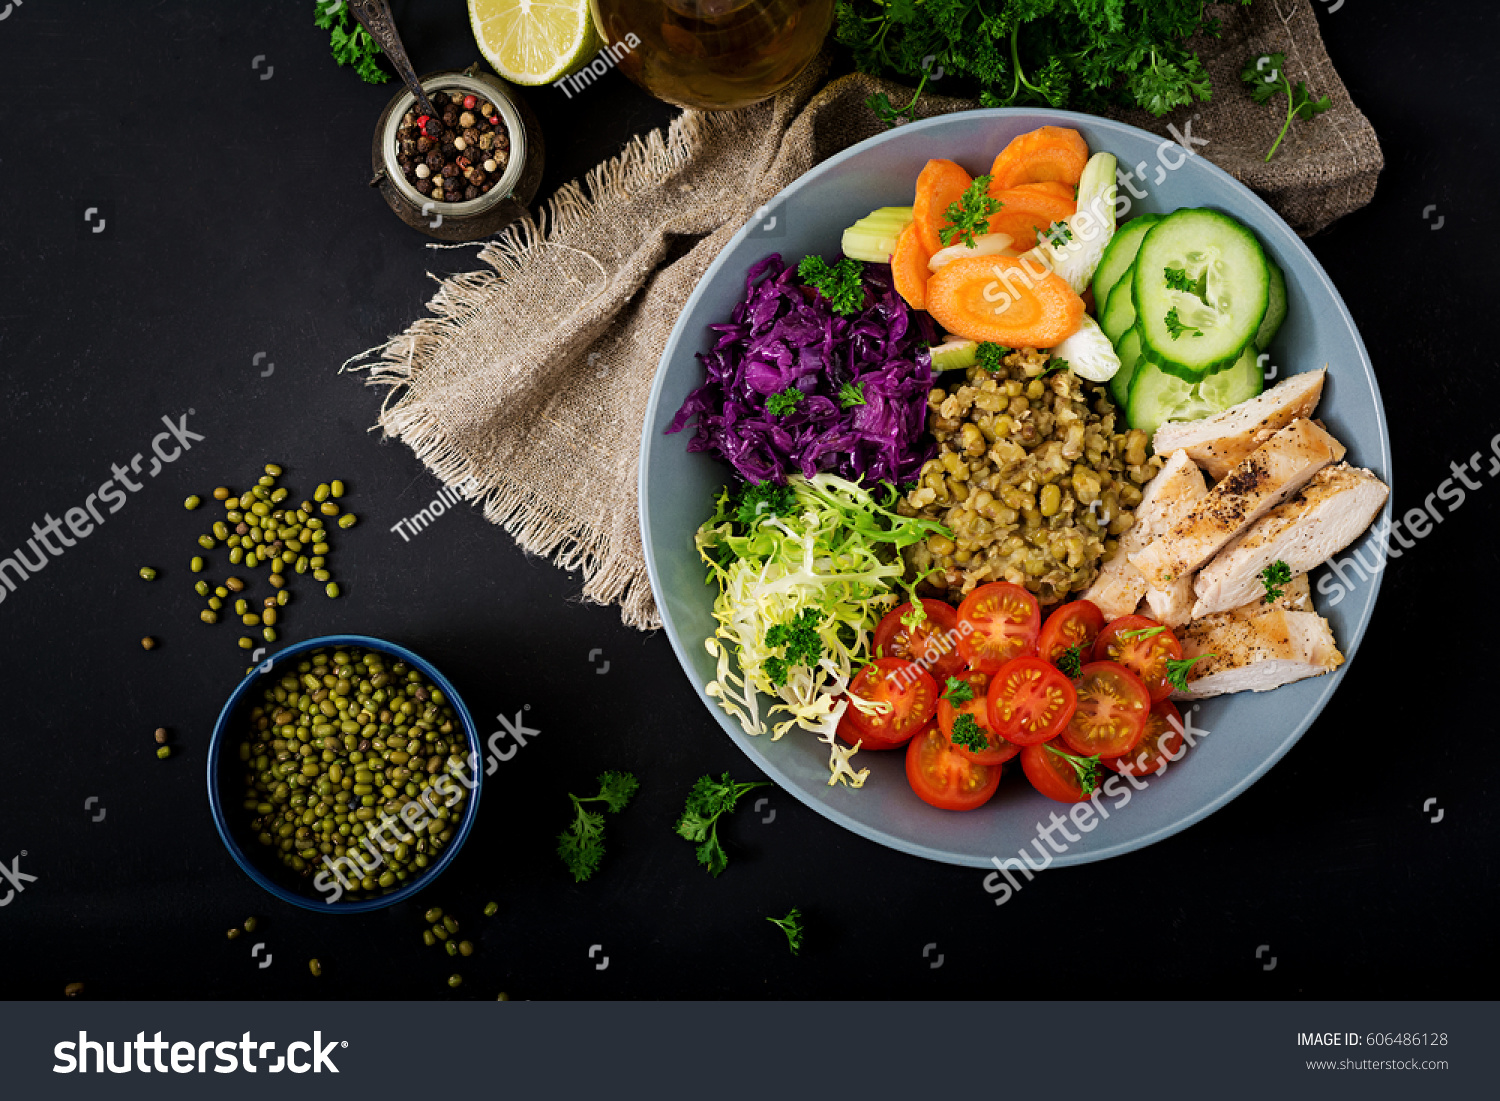 Healthy salad with chicken, tomatoes,  cucumber, lettuce, carrot, celery, red cabbage and  mung bean on dark background. Proper nutrition. Dietary menu. Flat lay. Top view #606486128